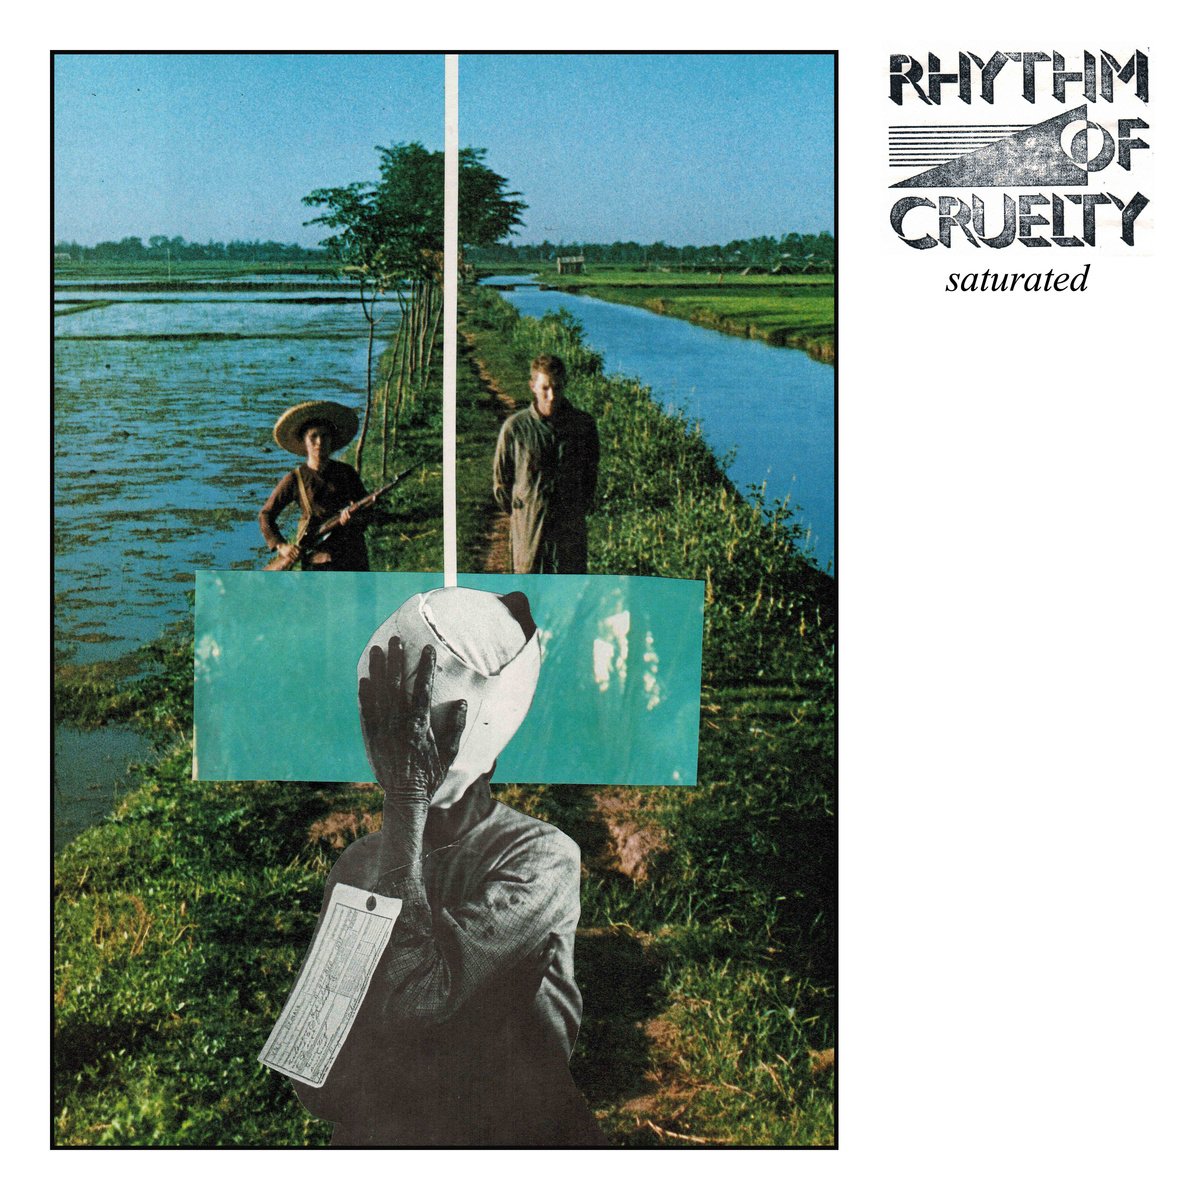 Image of Rhythm of Cruelty "Saturated" LP  limited 